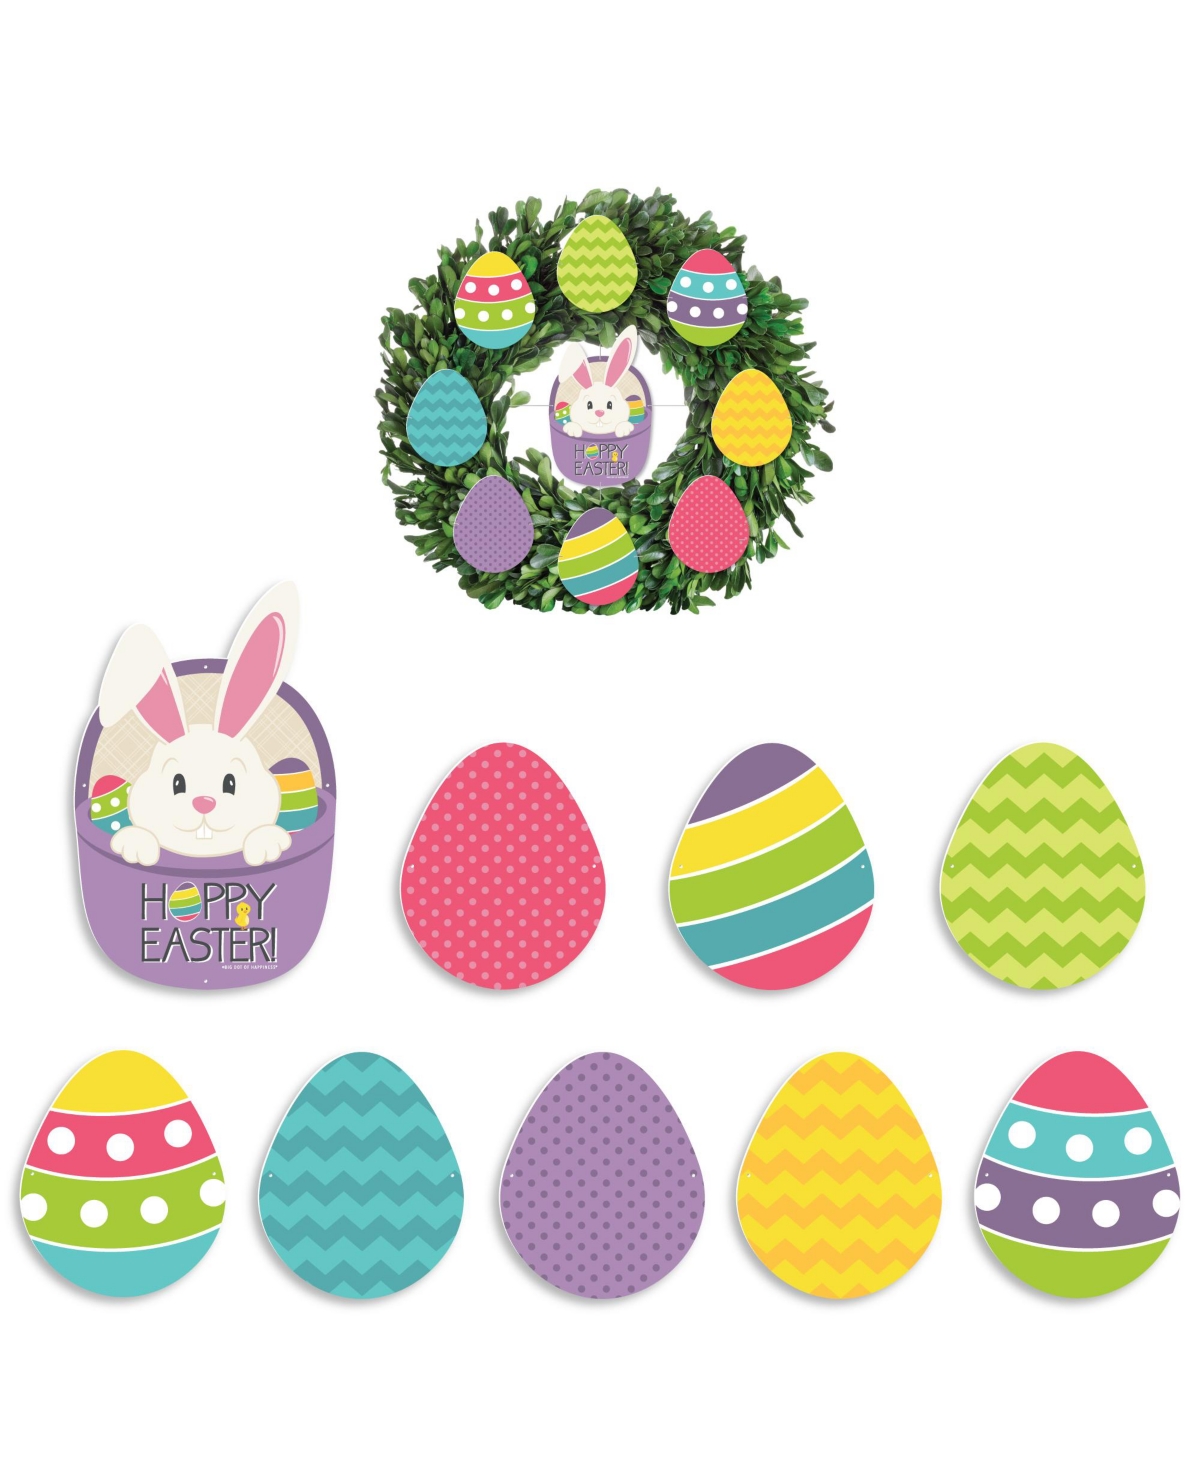 Big Dot of Happiness Hippity Hoppity - Diy Easter Bunny Party Front Door Decorations - Wreath Accessories - 9 Pieces